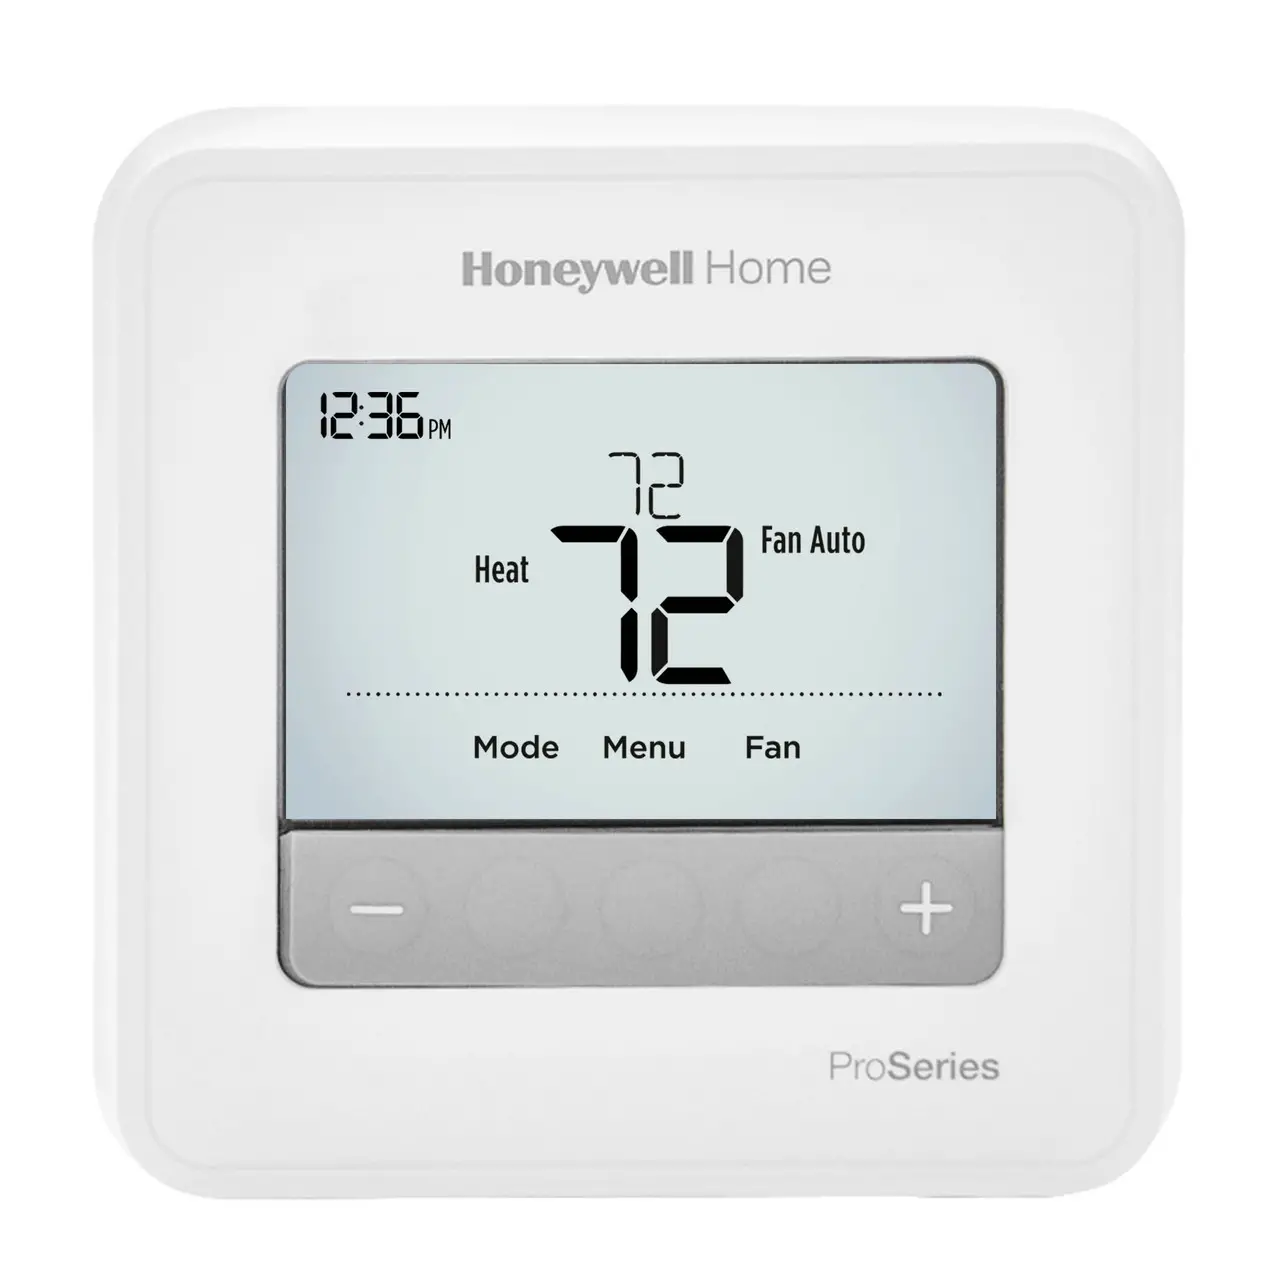 Honeywell Home T4 Pro Thermostat User Manual - Manualsnap